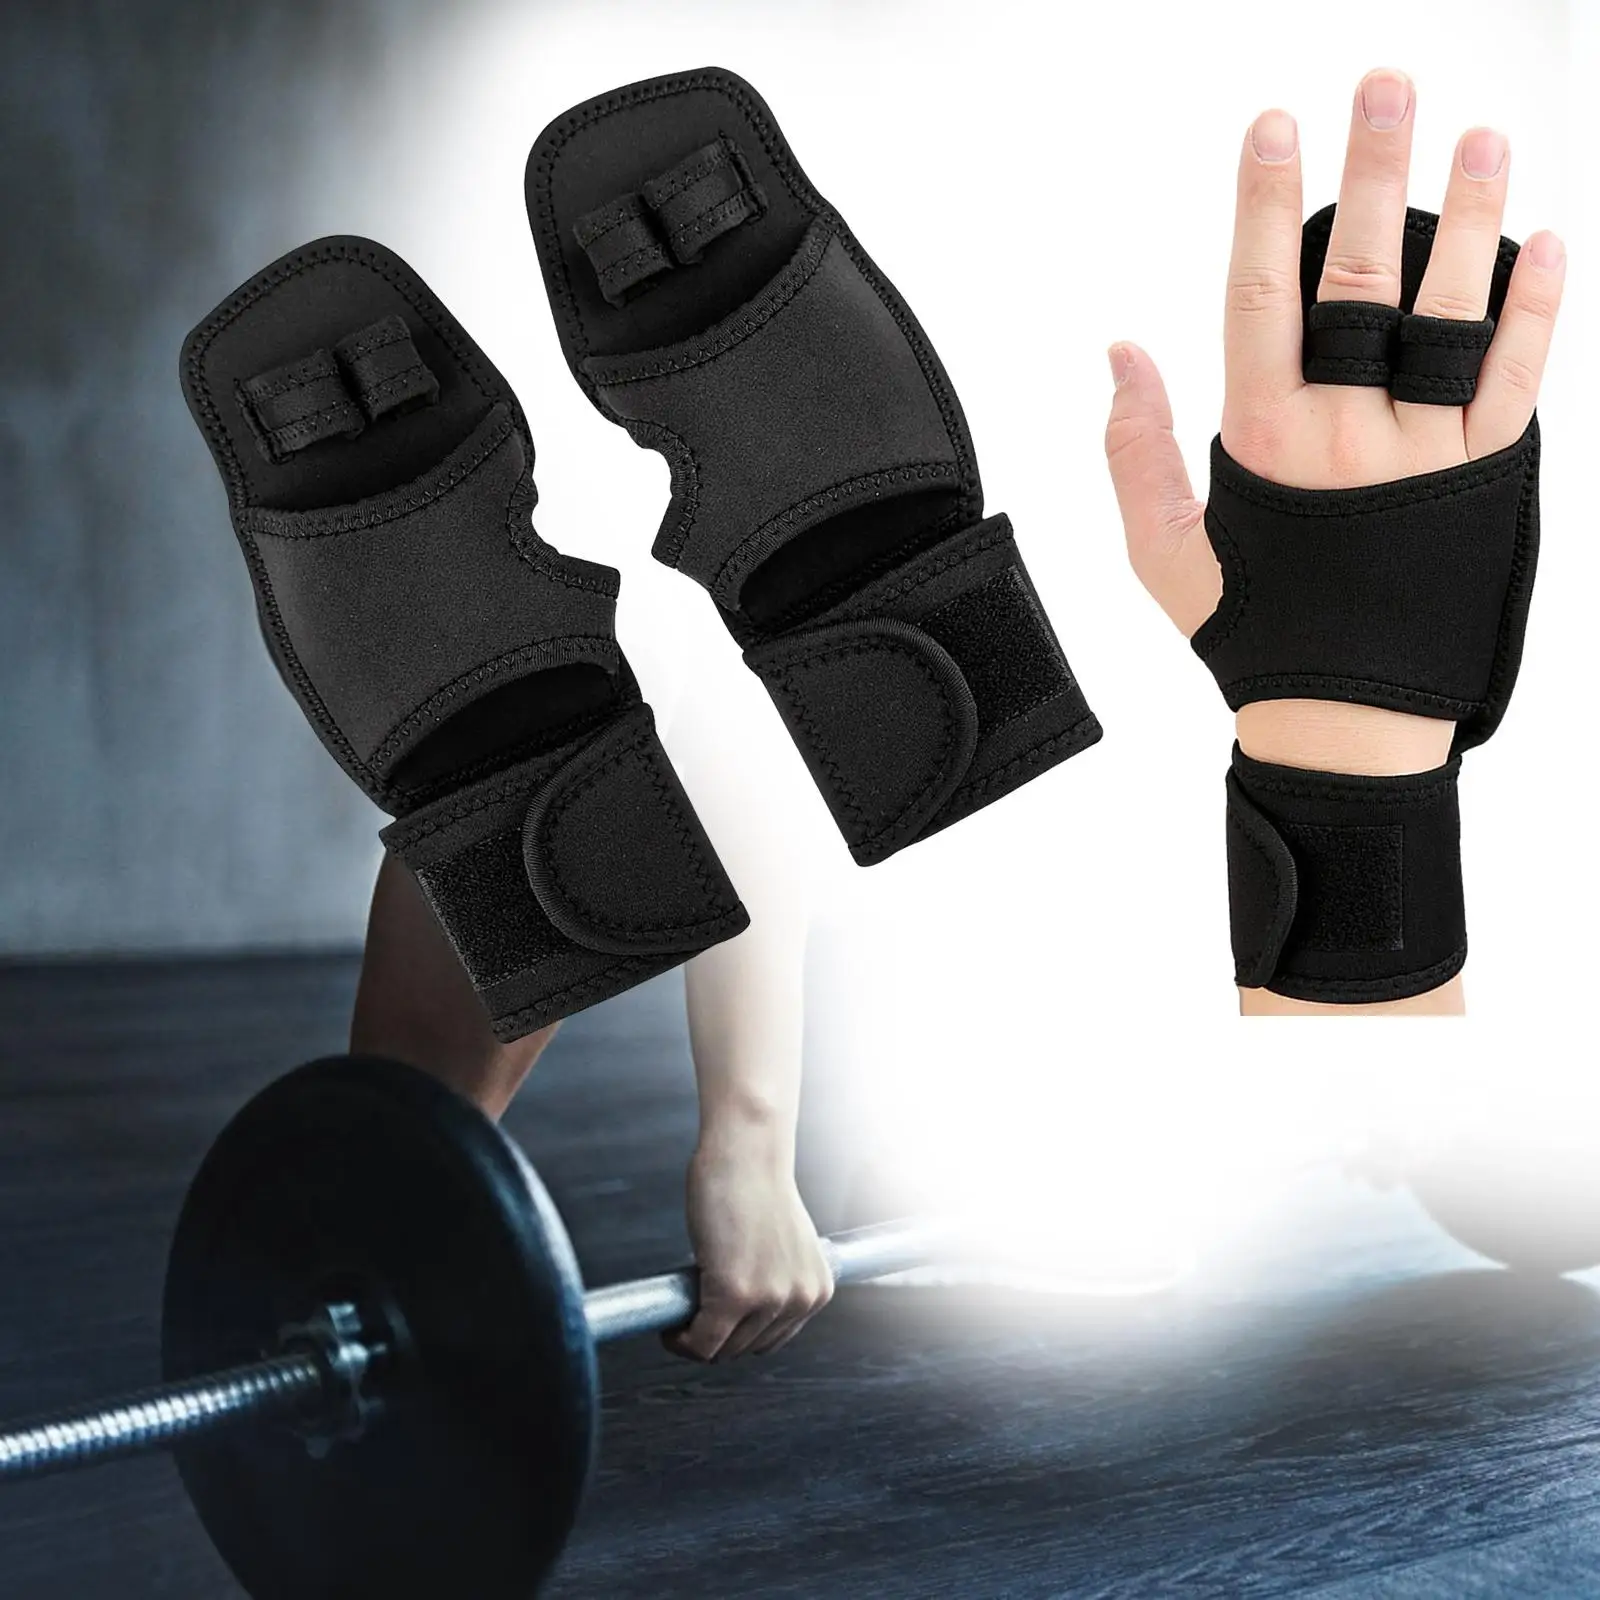 Lifting Wrist Support Wraps Hand Grips Bodybuilding Strength Training Hand Grips Support for Dumbbell Strength Training Shrugs 